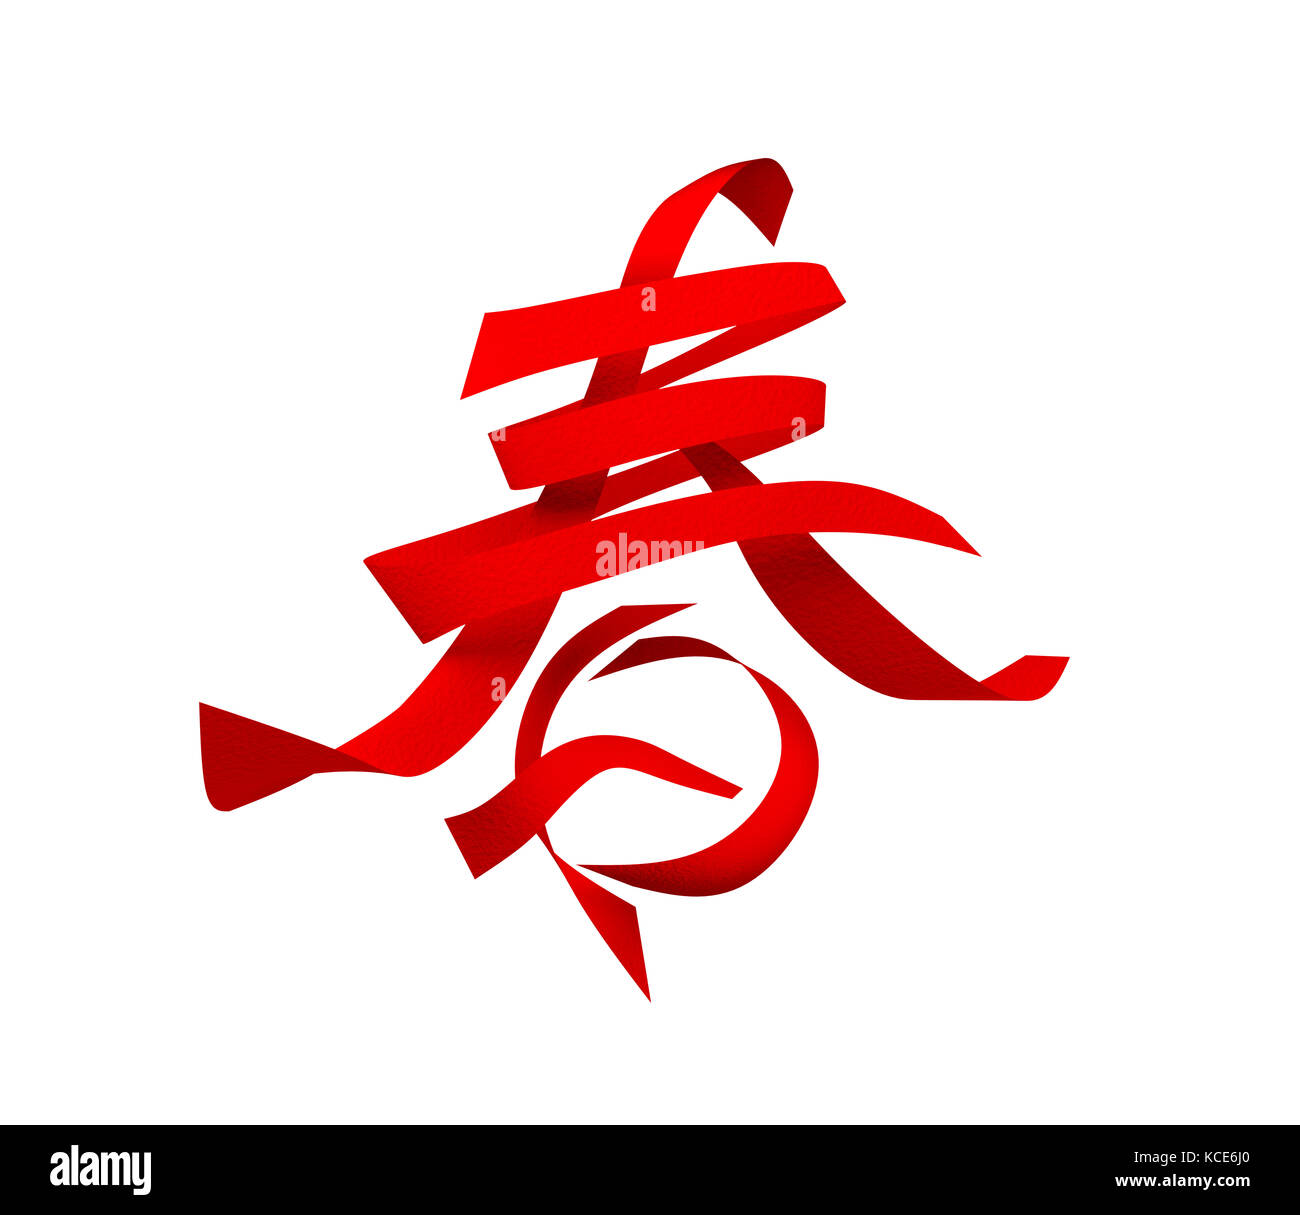 Chinese calligraphy 'chun' (Foreign text means spring) Stock Photo